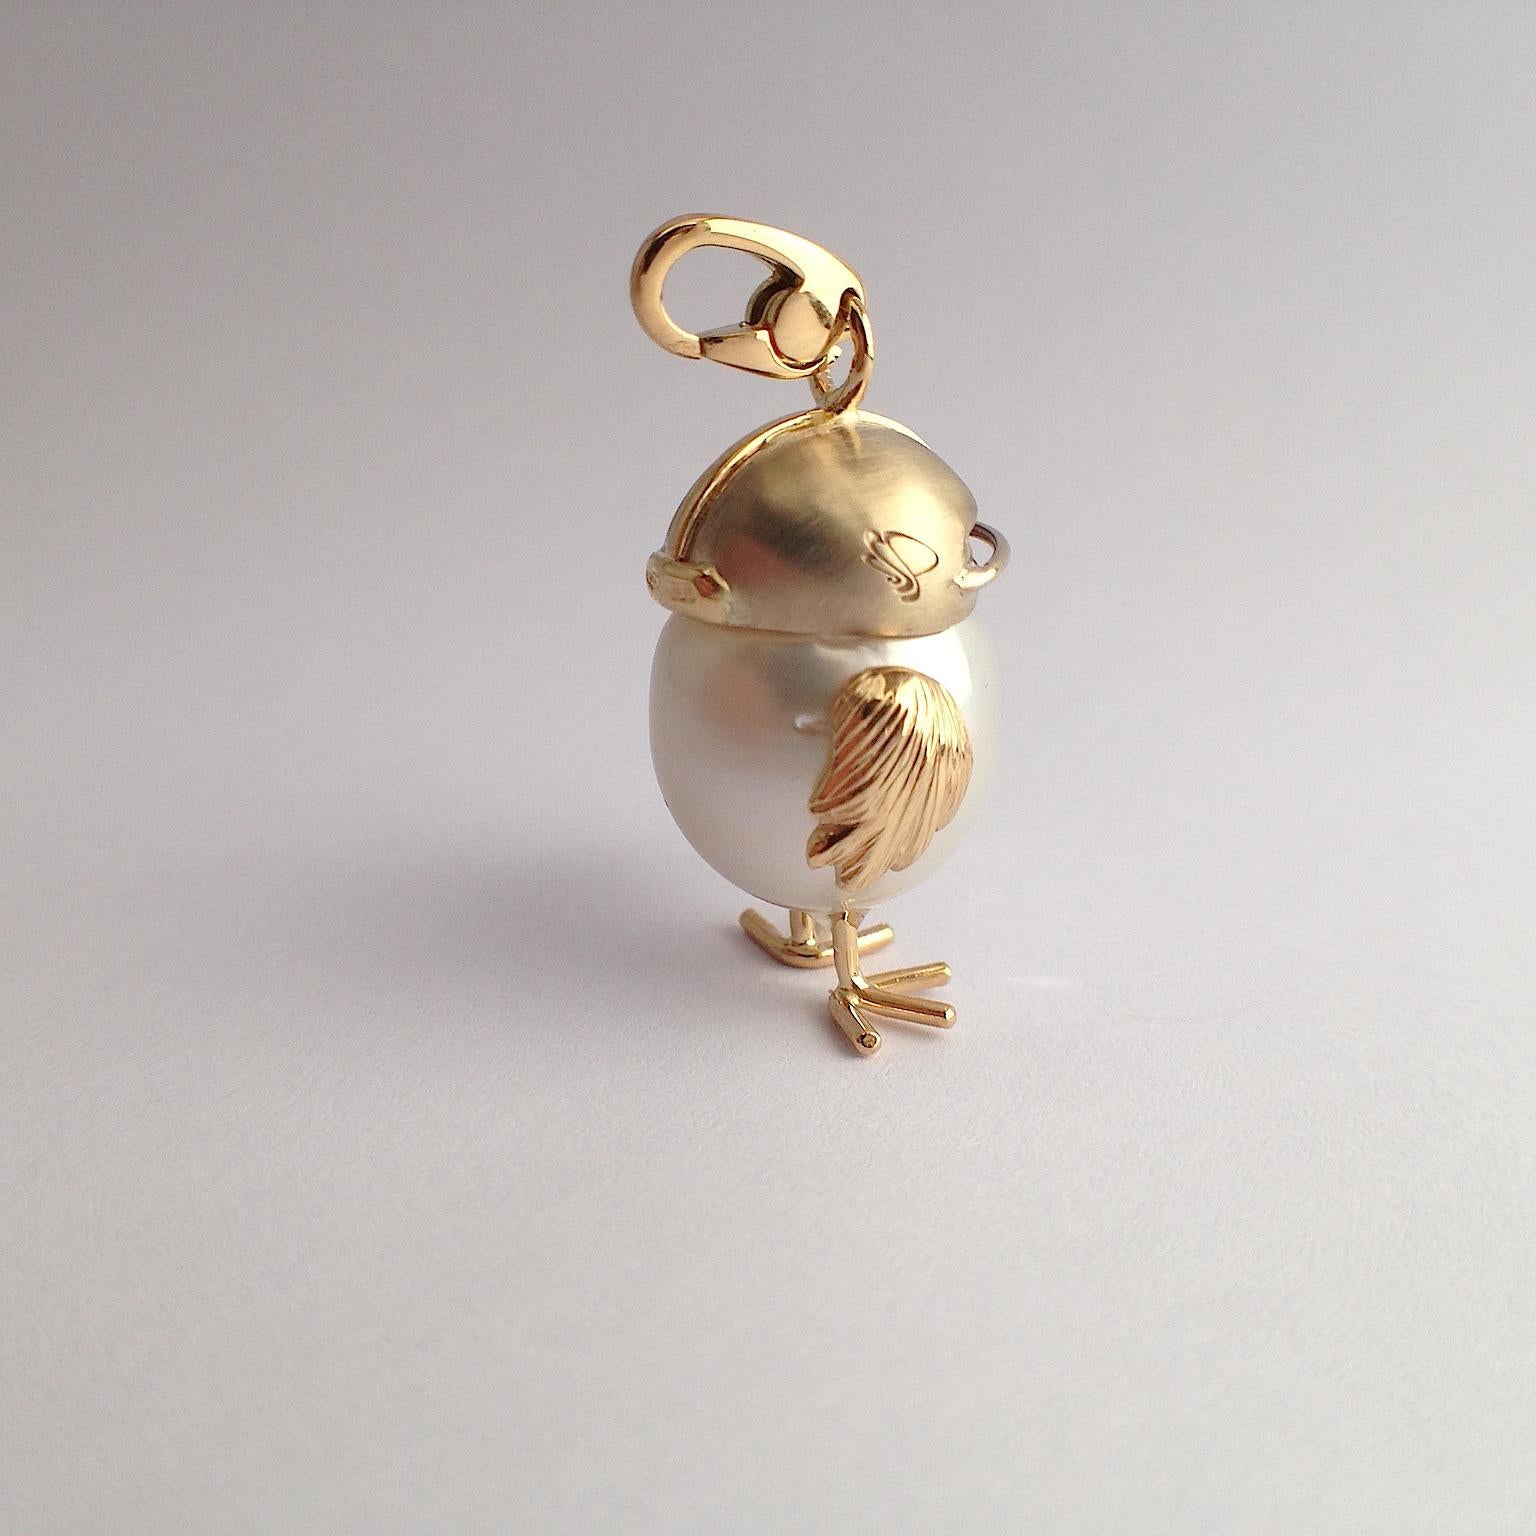 I find it nice to play with the materials and from an Australian pearl and gold to make something cute and fun. It is a precious and original object that can be worn all day as a pendant or as a beautiful charm.
This is my new third sport player